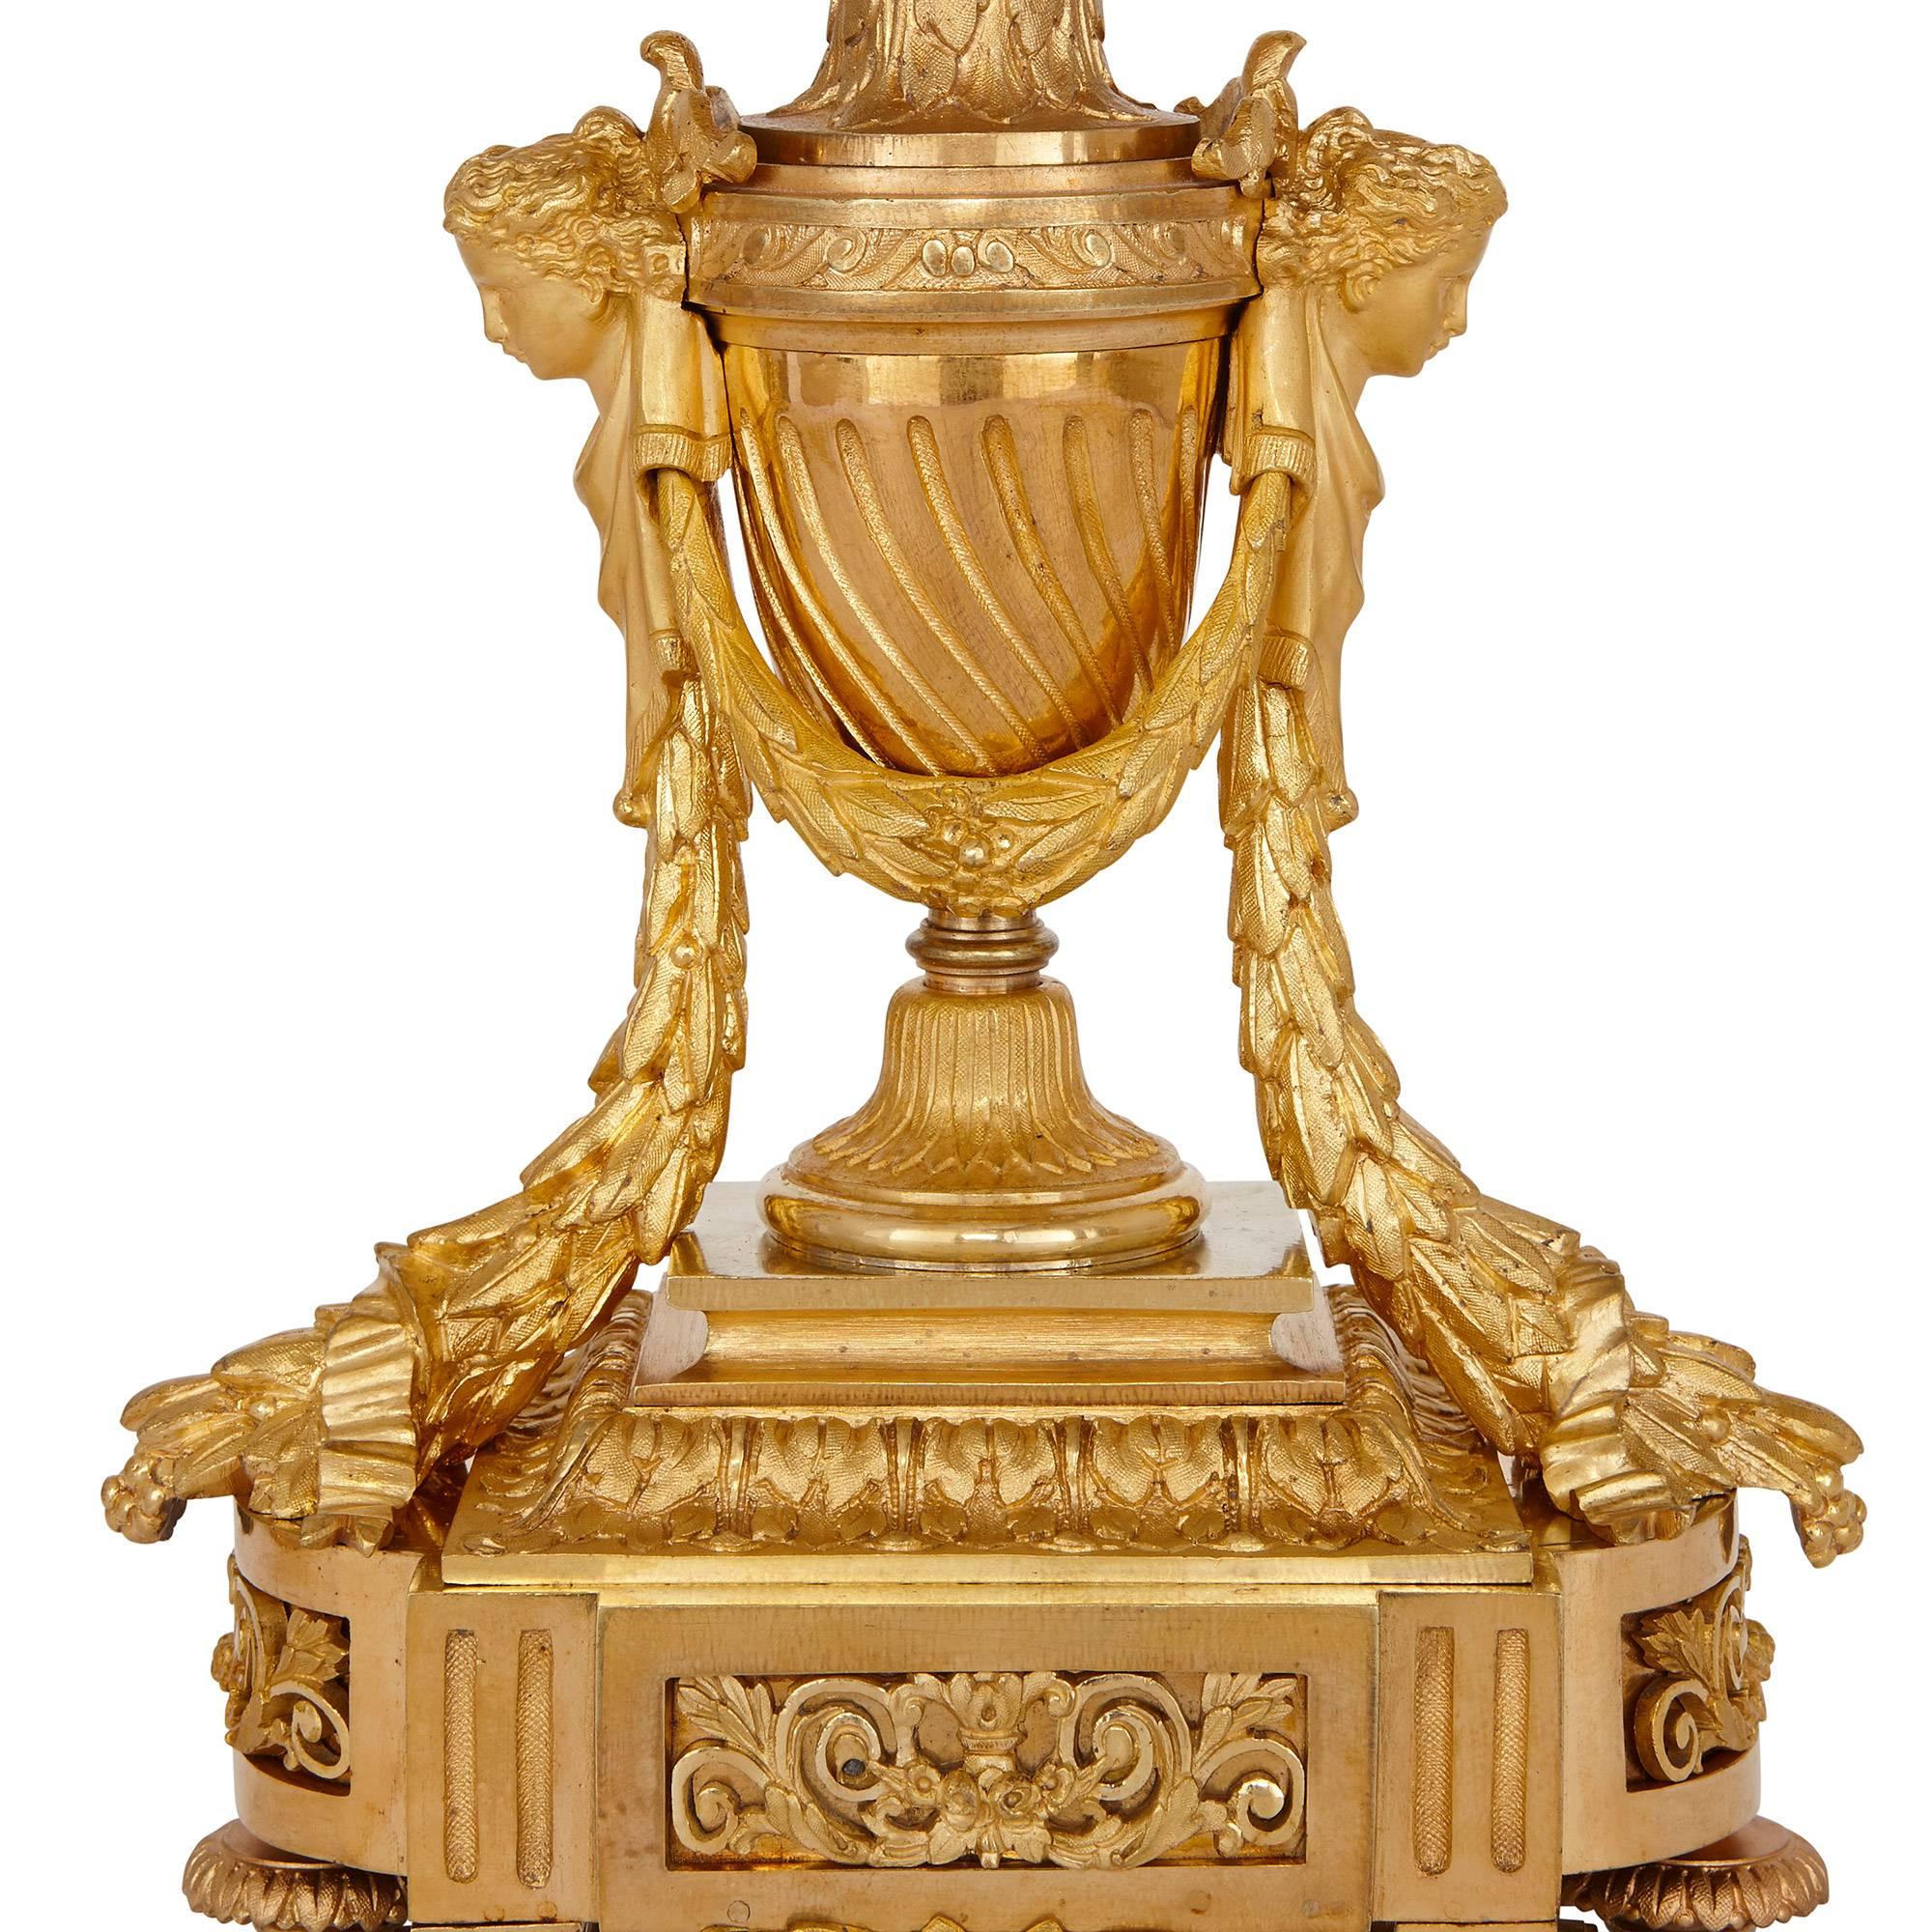 Ormolu 19th Century Neoclassical Style Gilt Bronze Clock Set by Picard